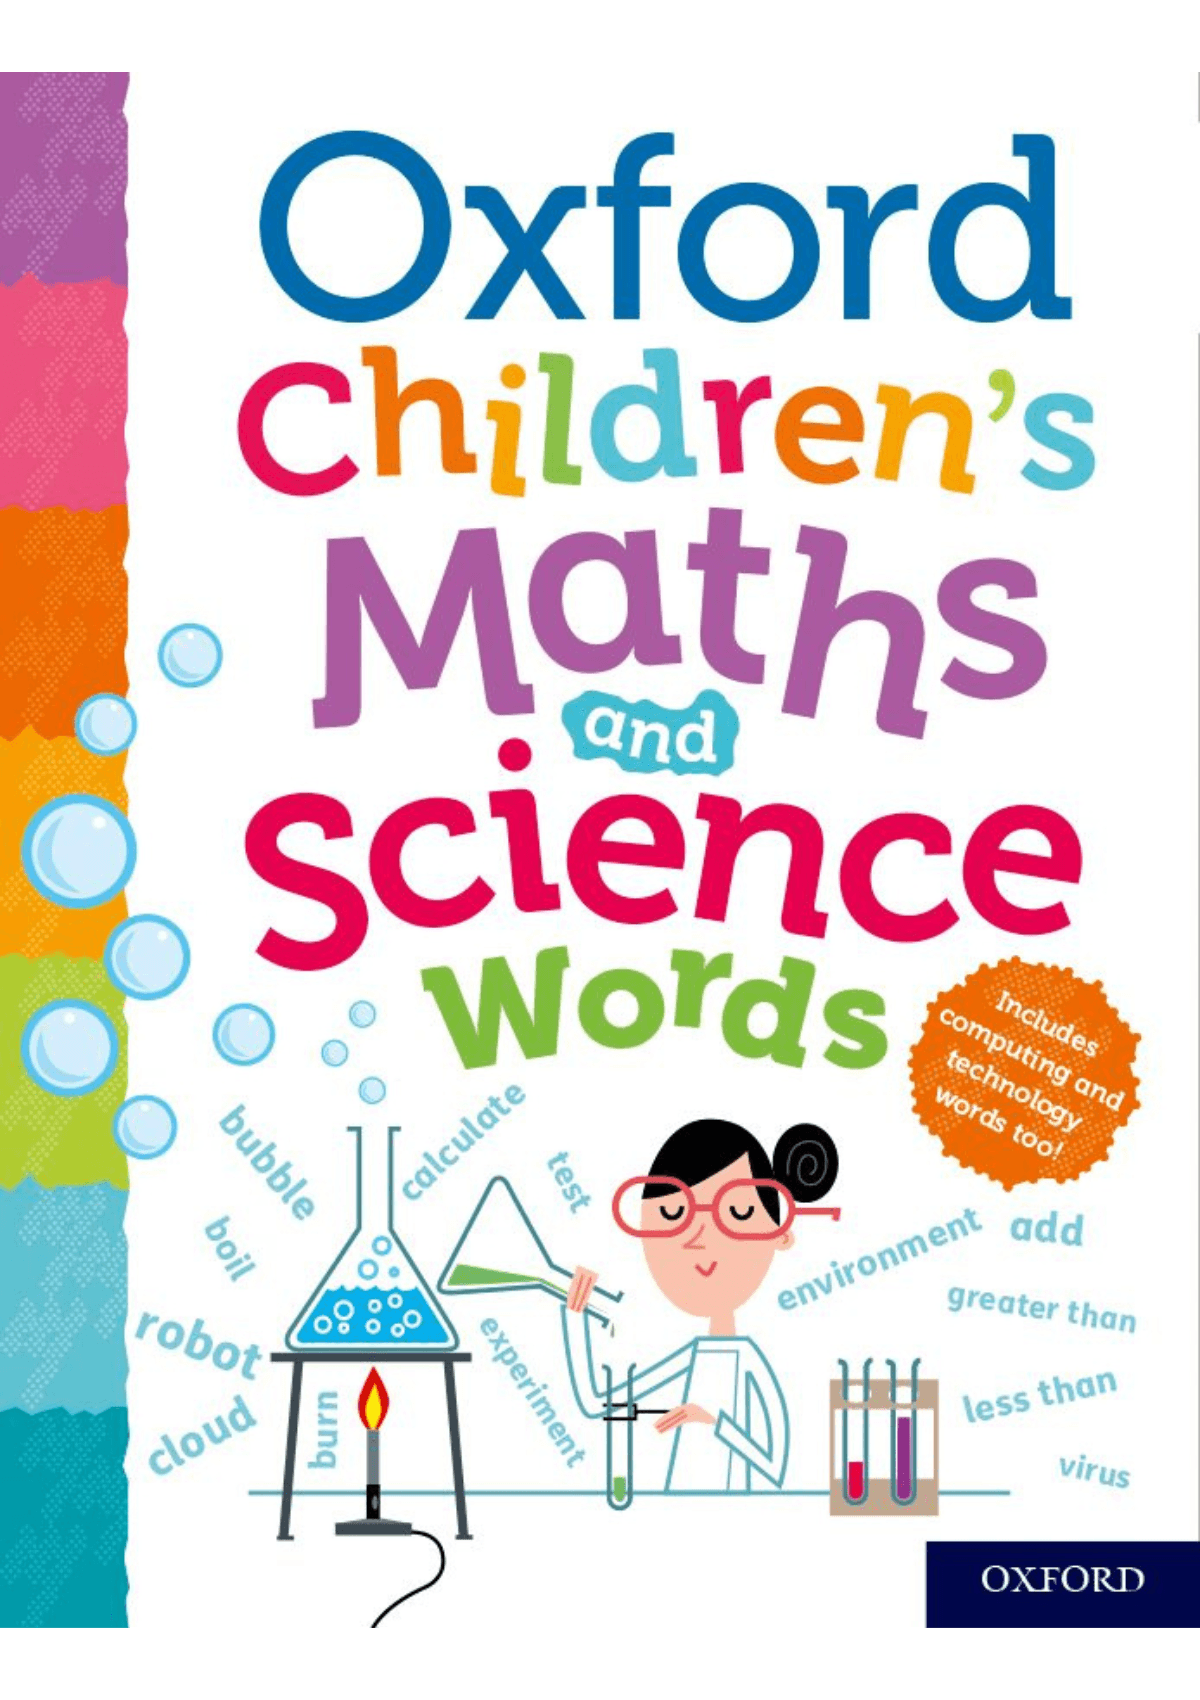 Press　Maths　Words　and　University　Online　Science　Store　Oxford　(China)　Children's　Oxford